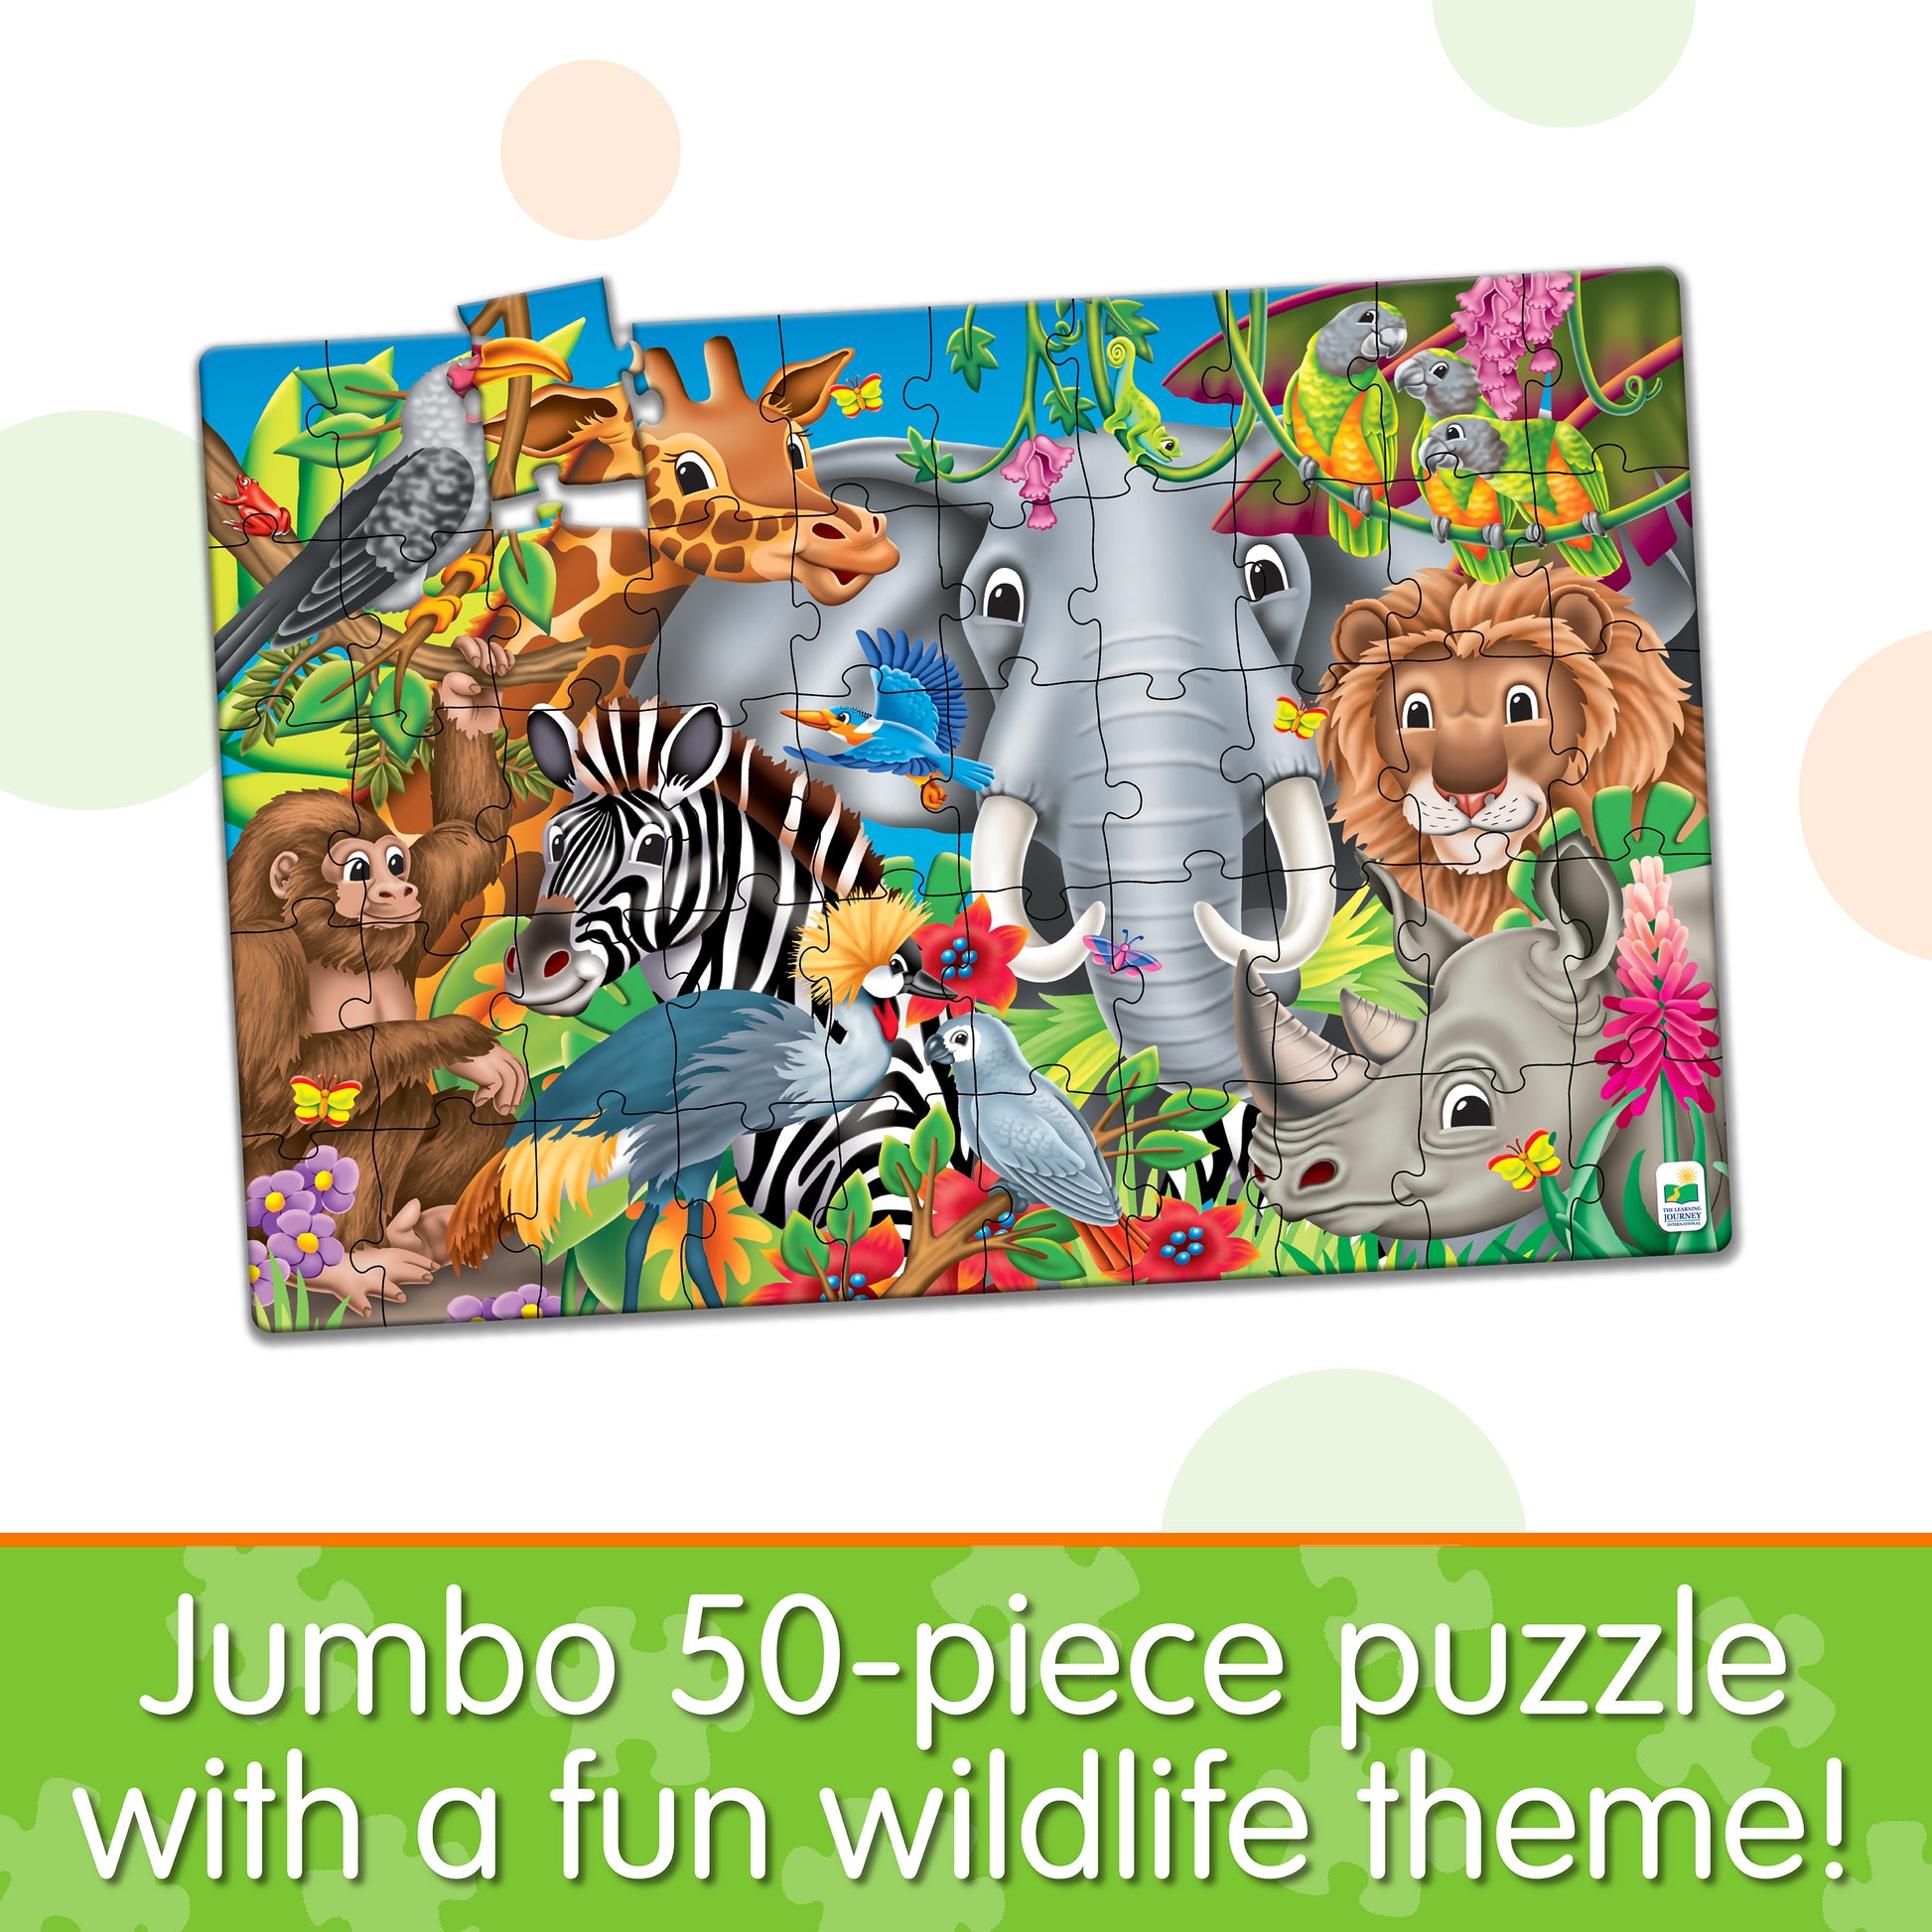 Infographic of Jumbo Floor Puzzle - Animals of the World that reads, "Jumbo 50-piece puzzle with a fun wildlife theme!"